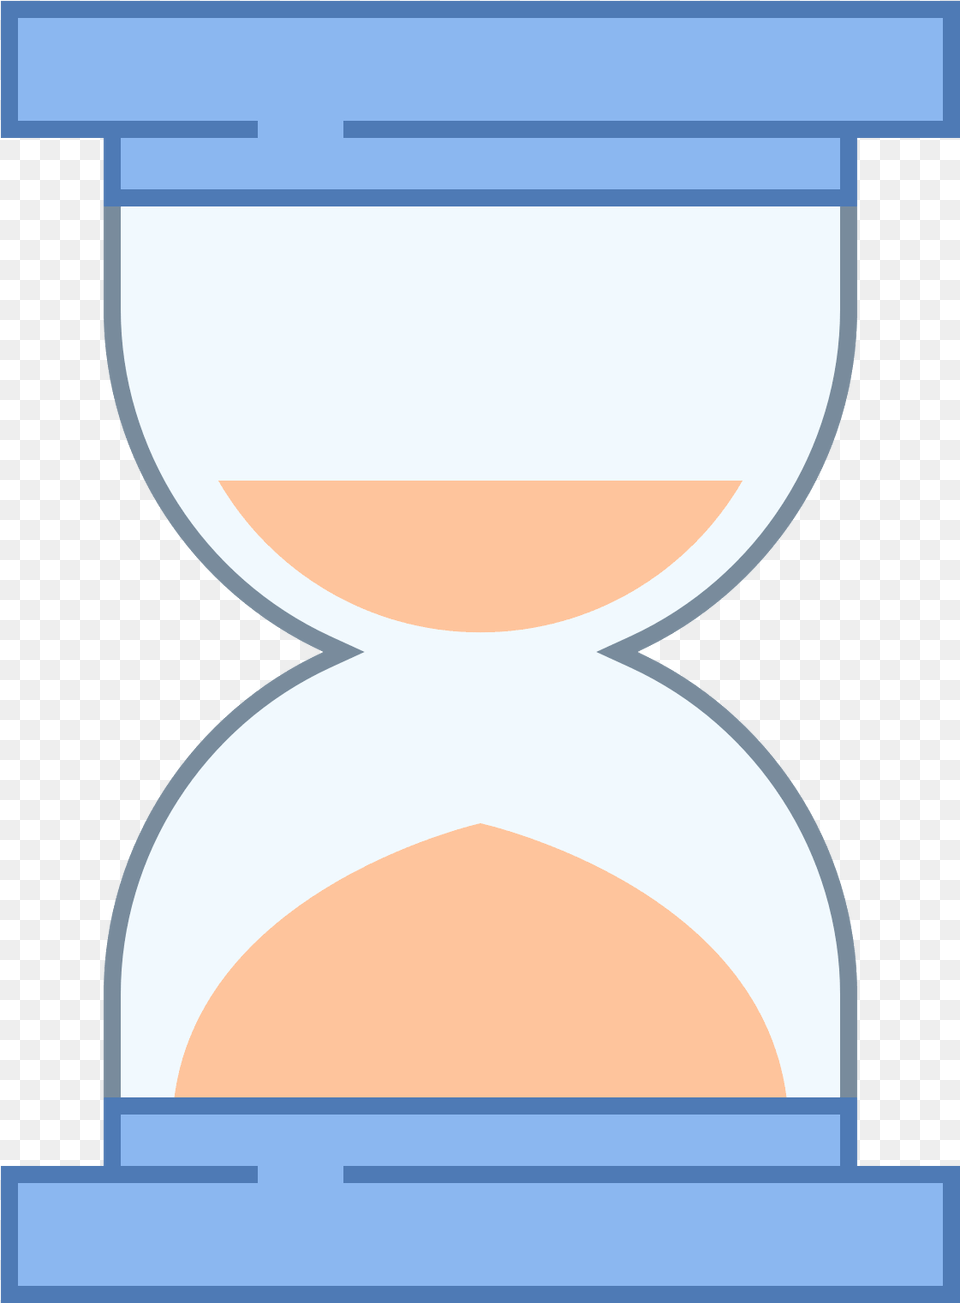 A Logo Of An Hourglass Reduced To An Of Windows 10 Hourglass, Astronomy, Moon, Nature, Night Png Image